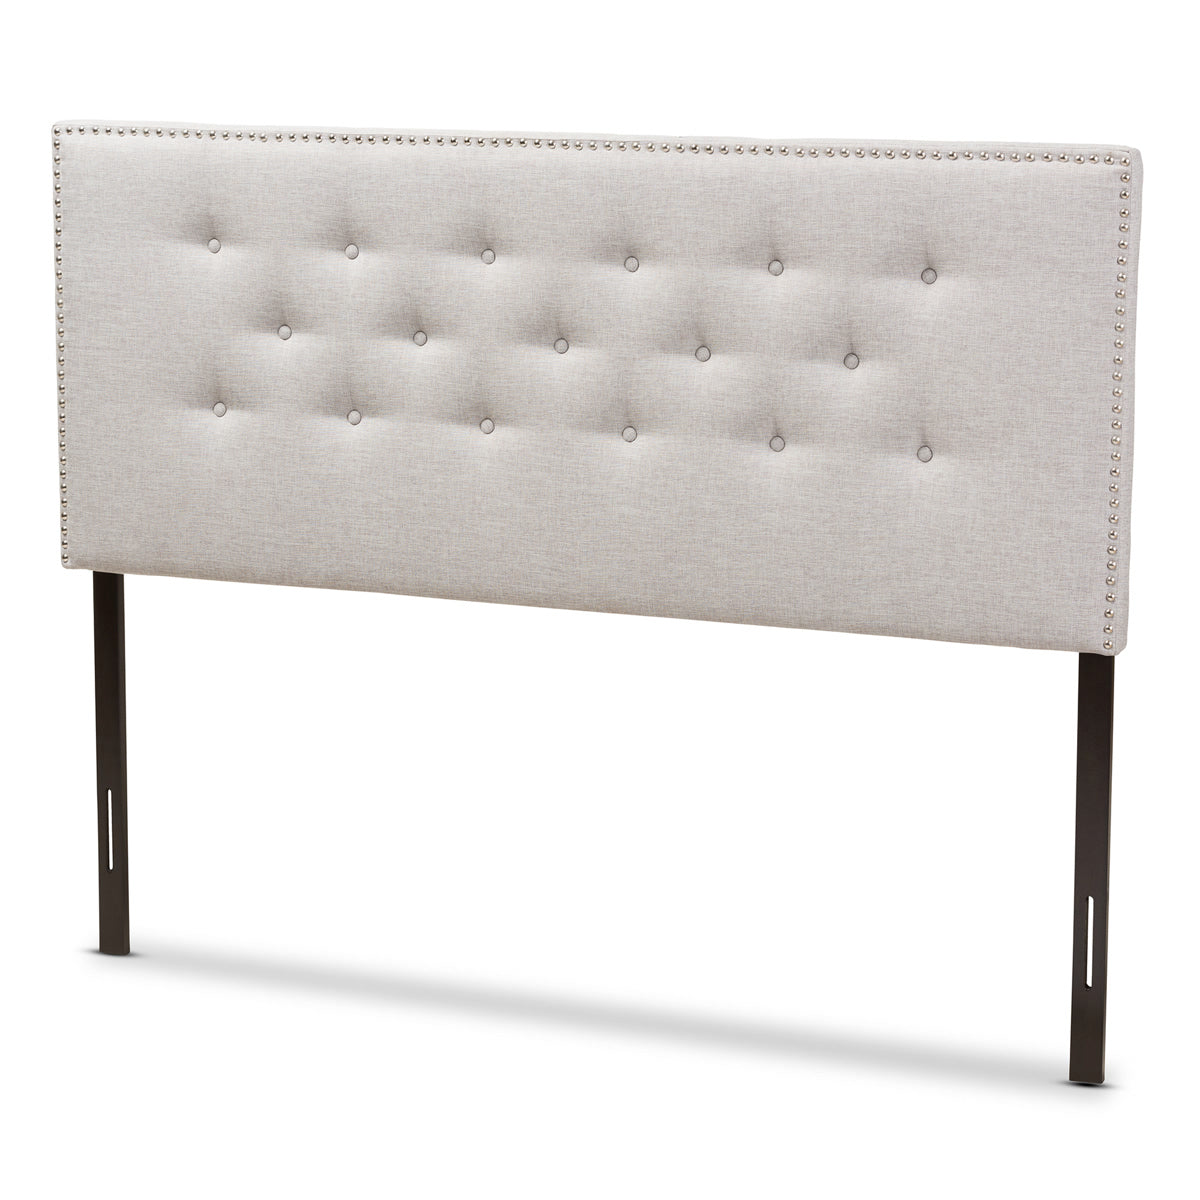 Baxton Studio Windsor Modern and Contemporary Greyish Beige Fabric Upholstered Queen Size Headboard Baxton Studio-Headboards-Minimal And Modern - 1